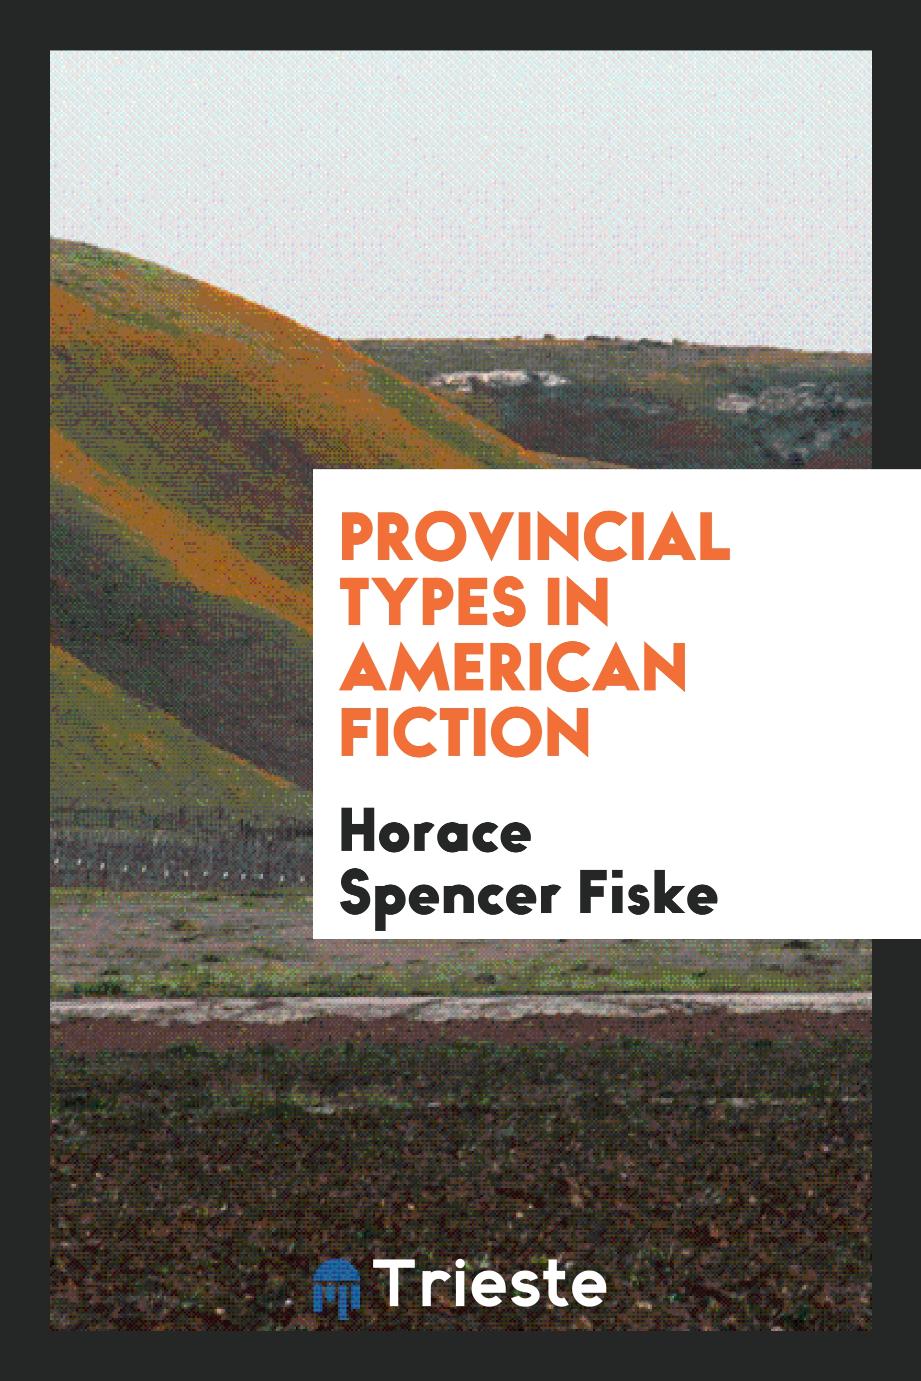 Provincial types in American fiction